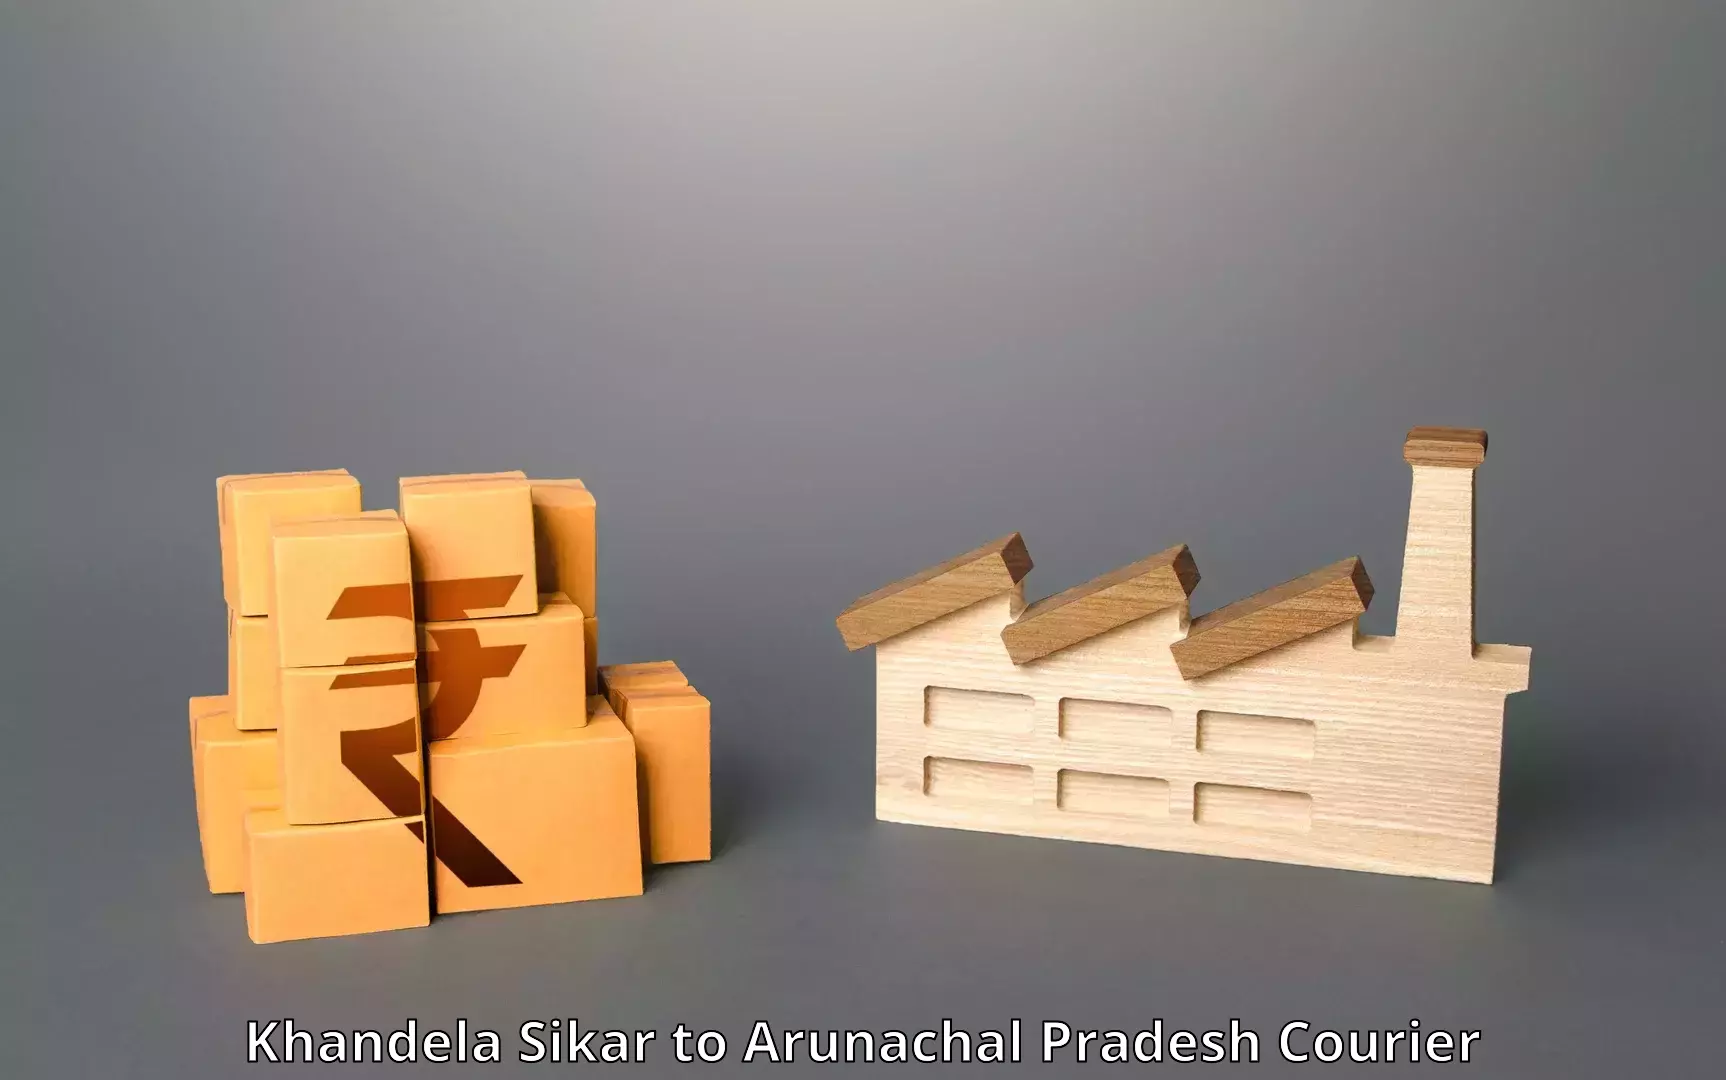 State-of-the-art courier technology Khandela Sikar to Aalo